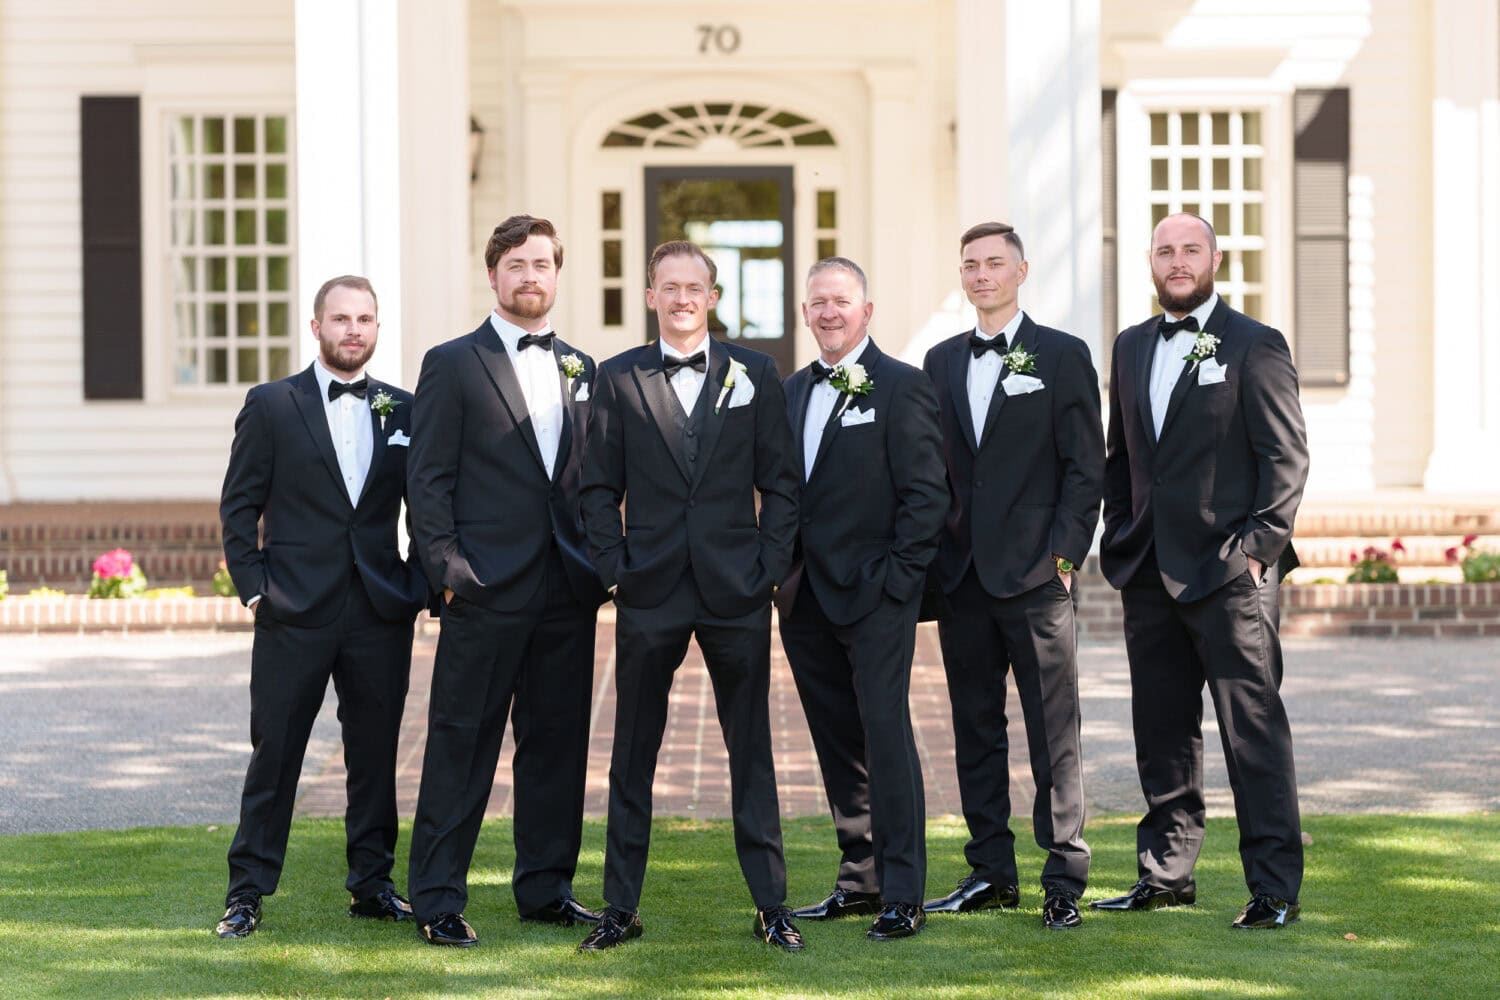 Portraits of the groom and groomsmen in front of the clubhouse - Pawleys Plantation